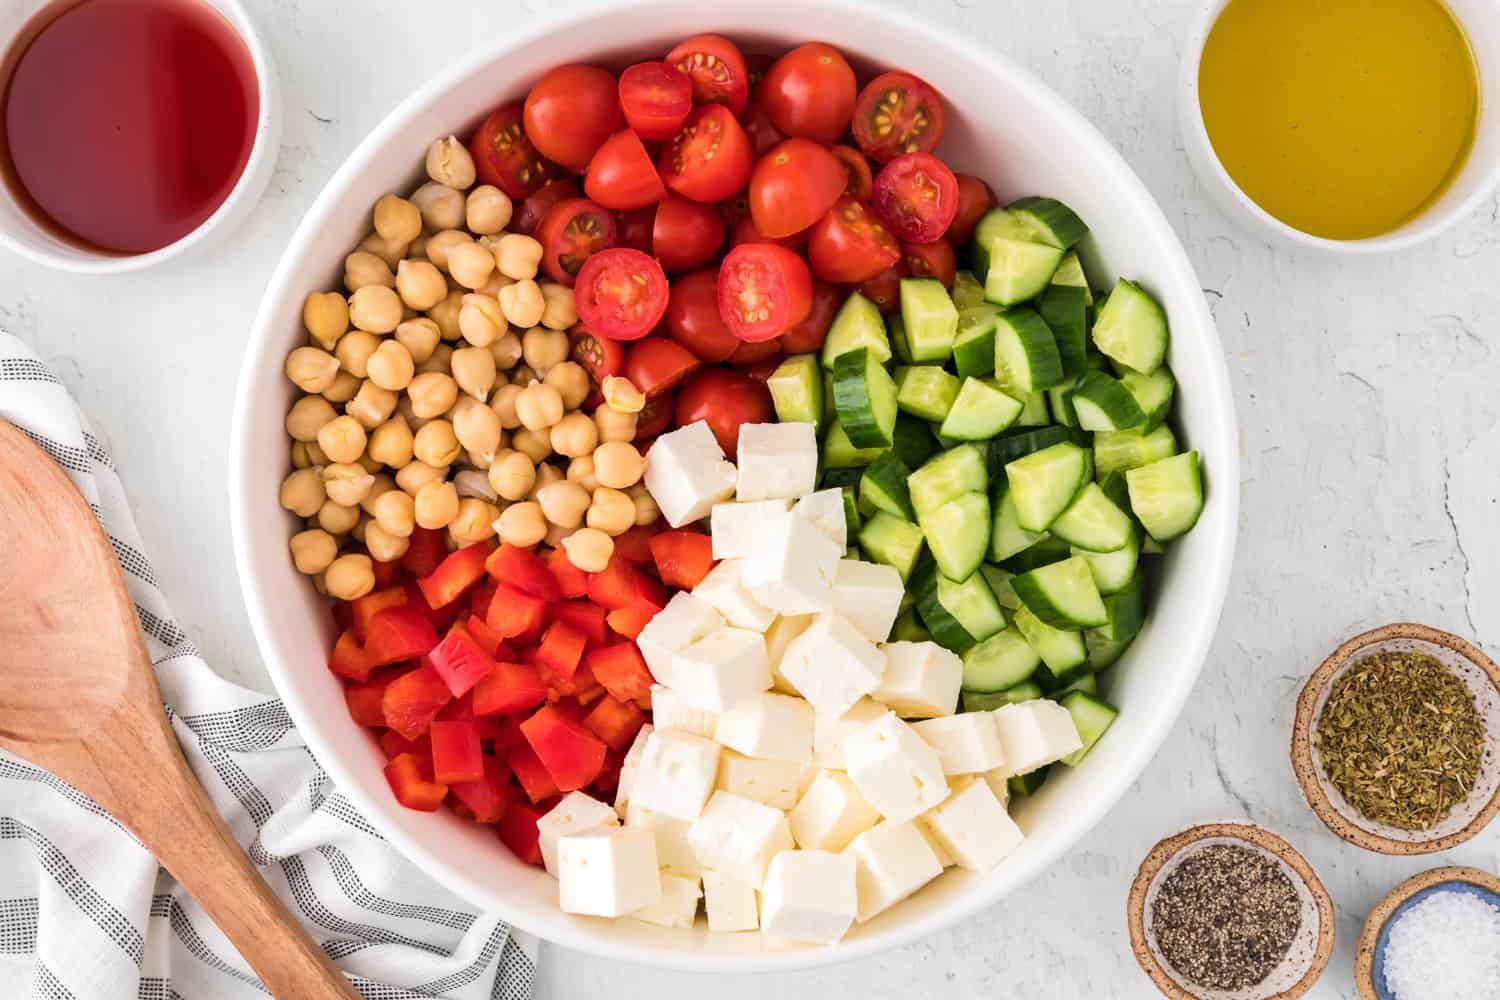 Chopped ingredients in a large mixing bowl.